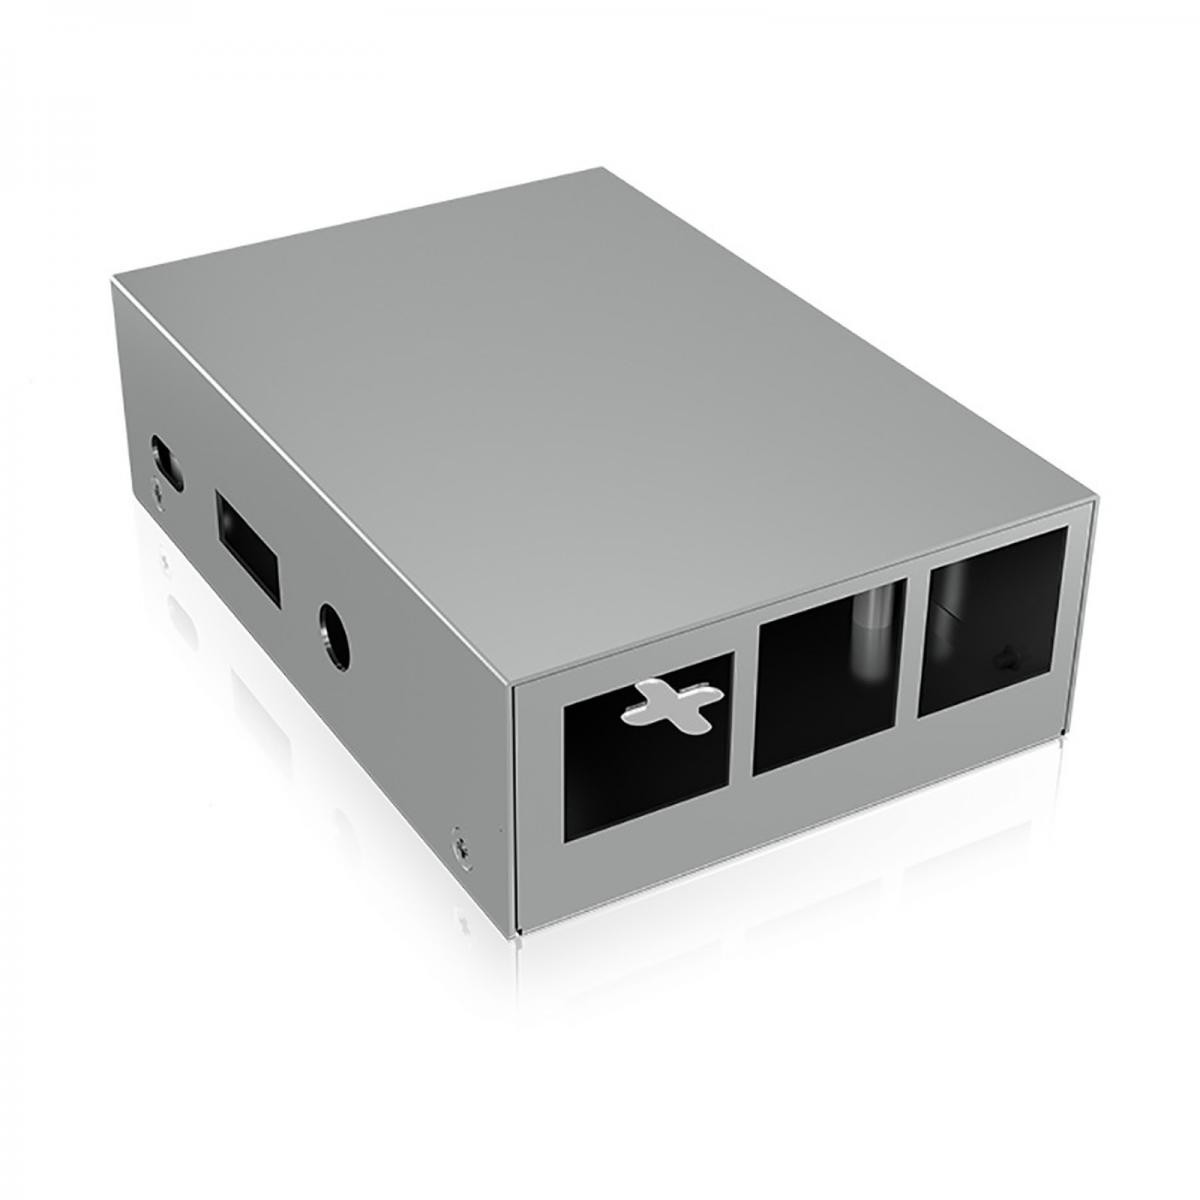 Icybox - ICY BOX IB-RP104-S (Argent) - Boitier PC